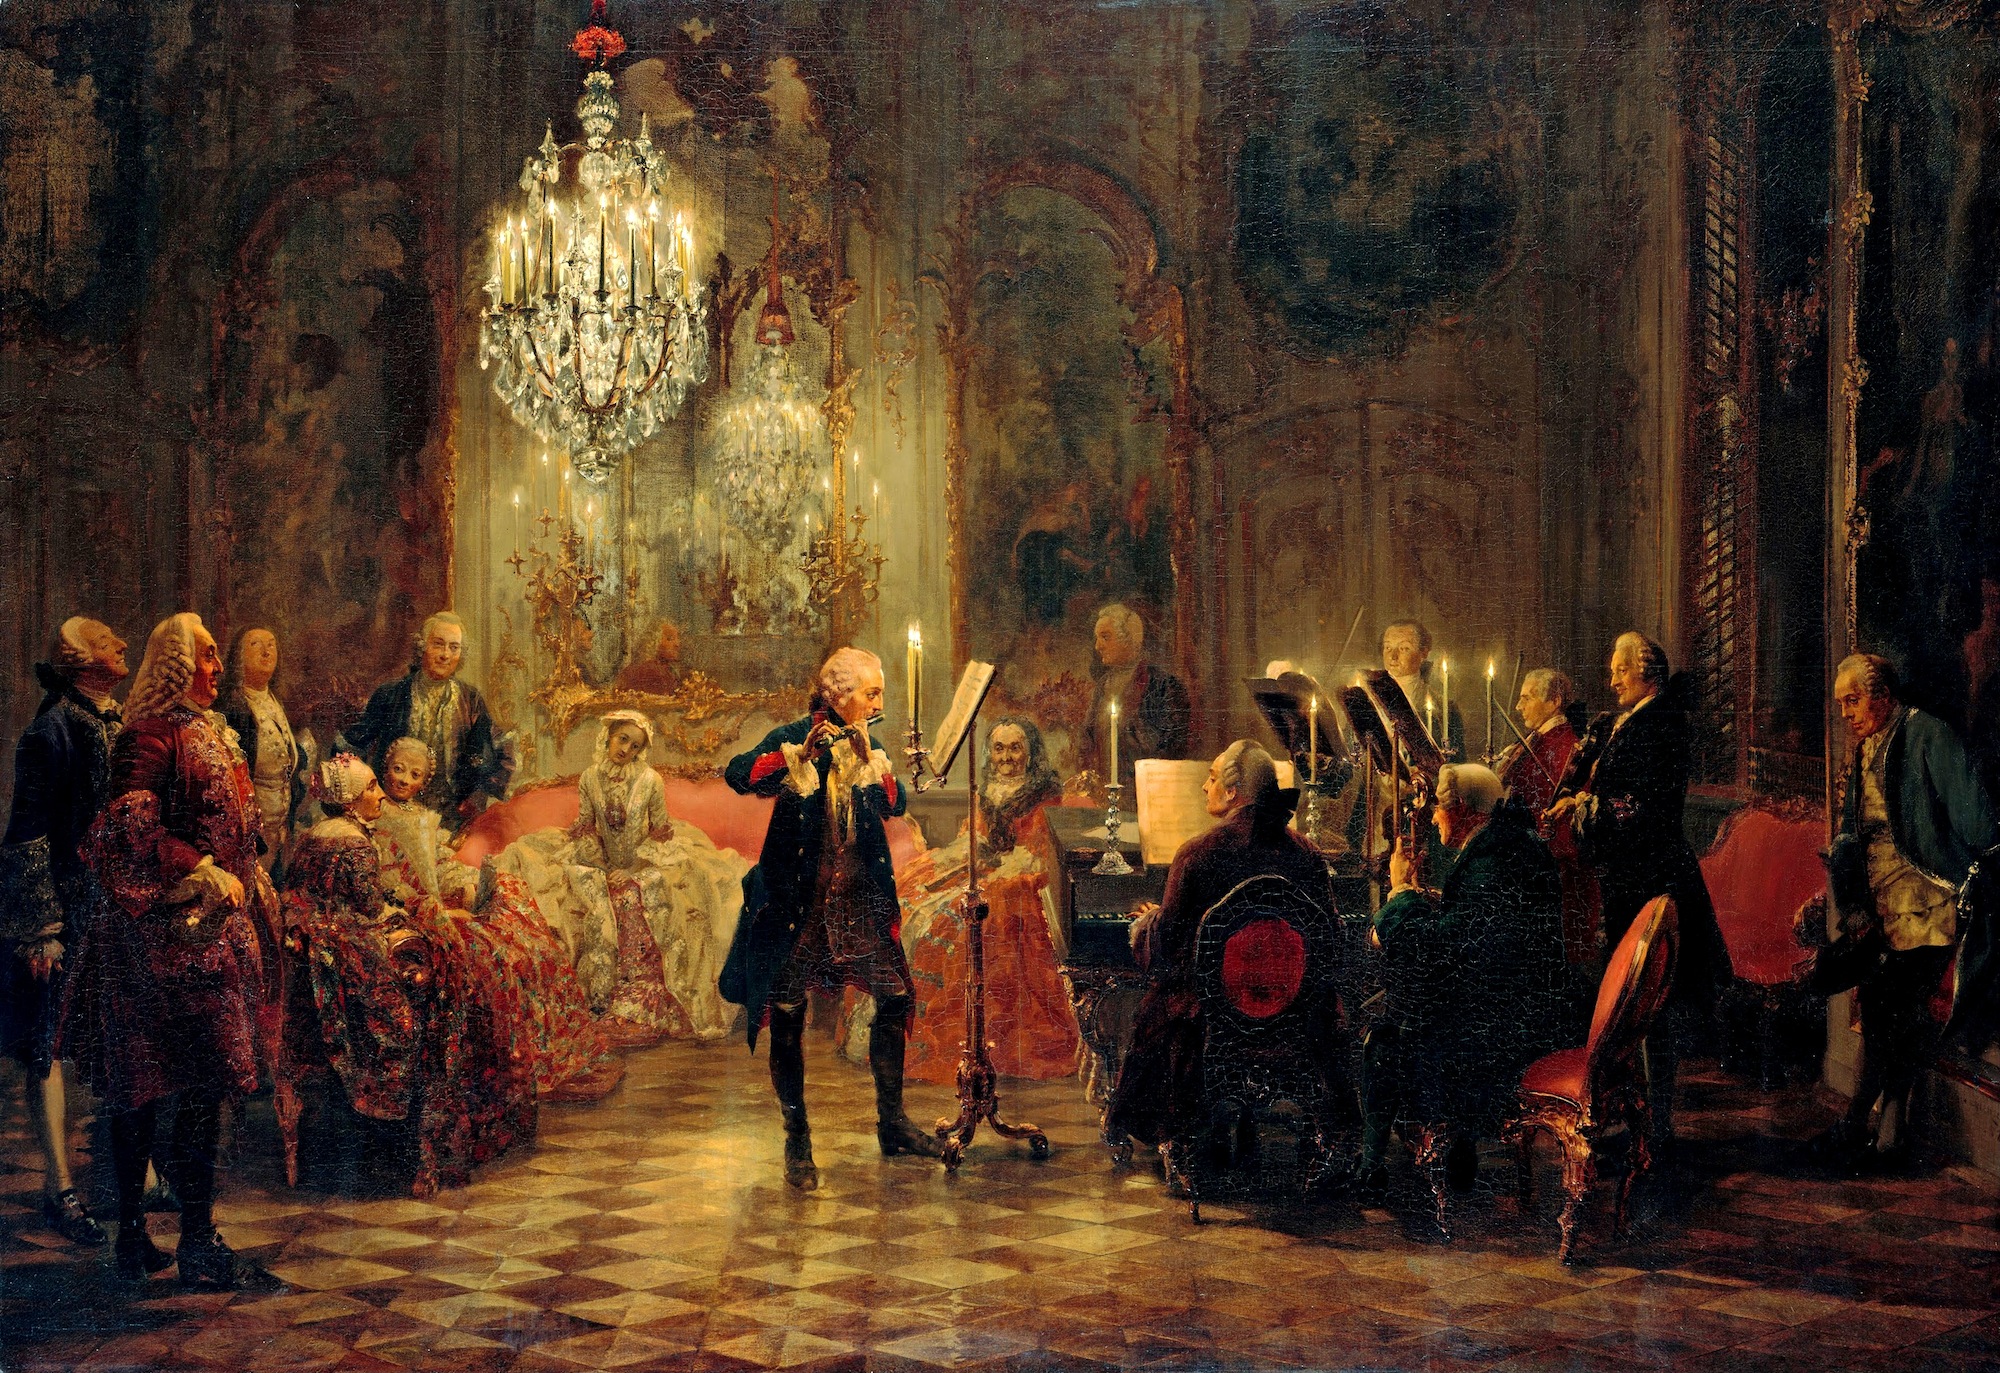 The Lesser Known Artists: W.F. Bach, Quantz and Kirnberger